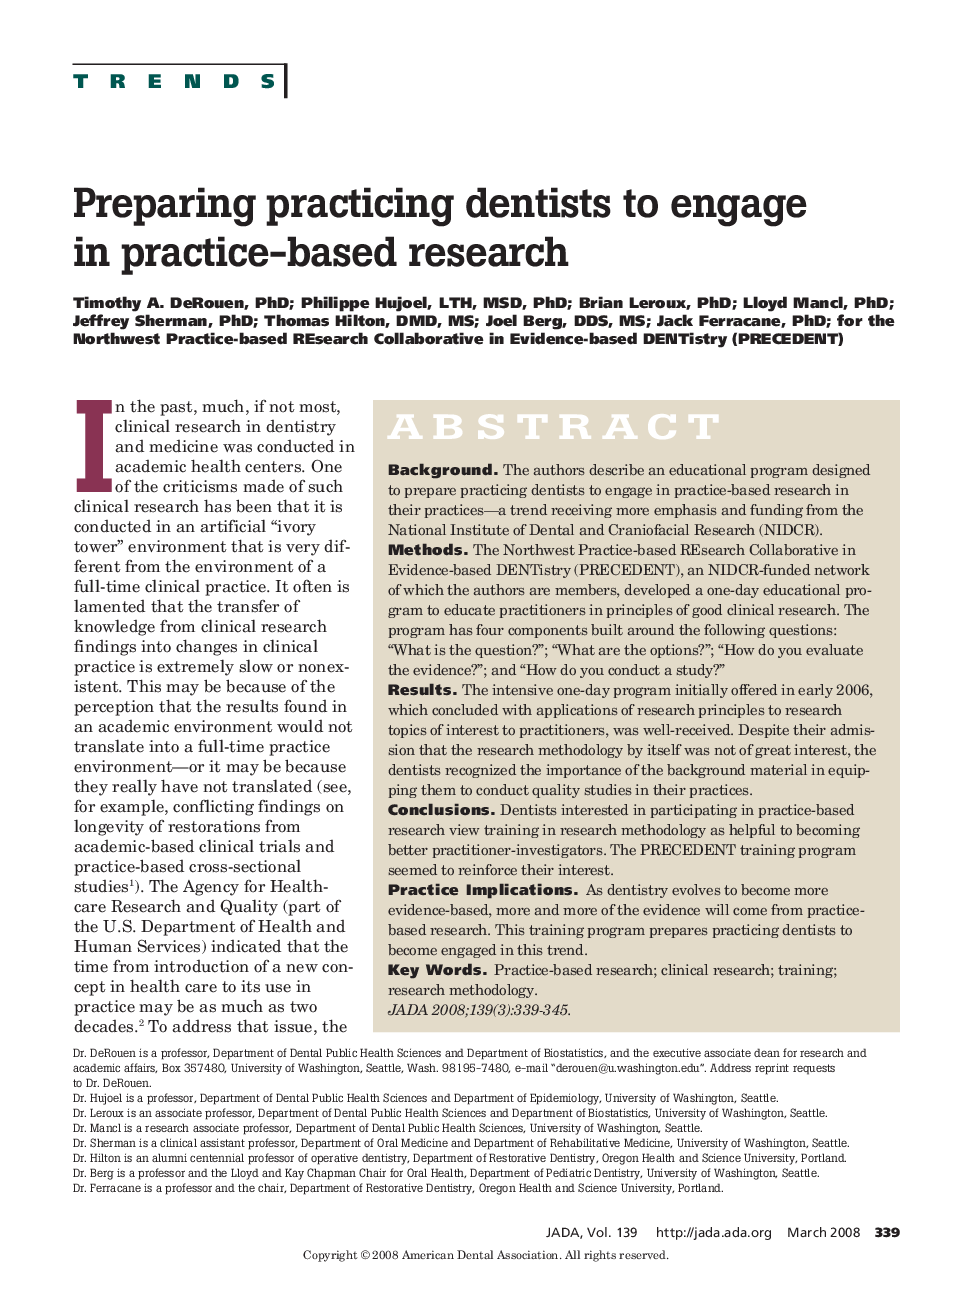 Preparing Practicing Dentists to Engage in Practice-Based Research